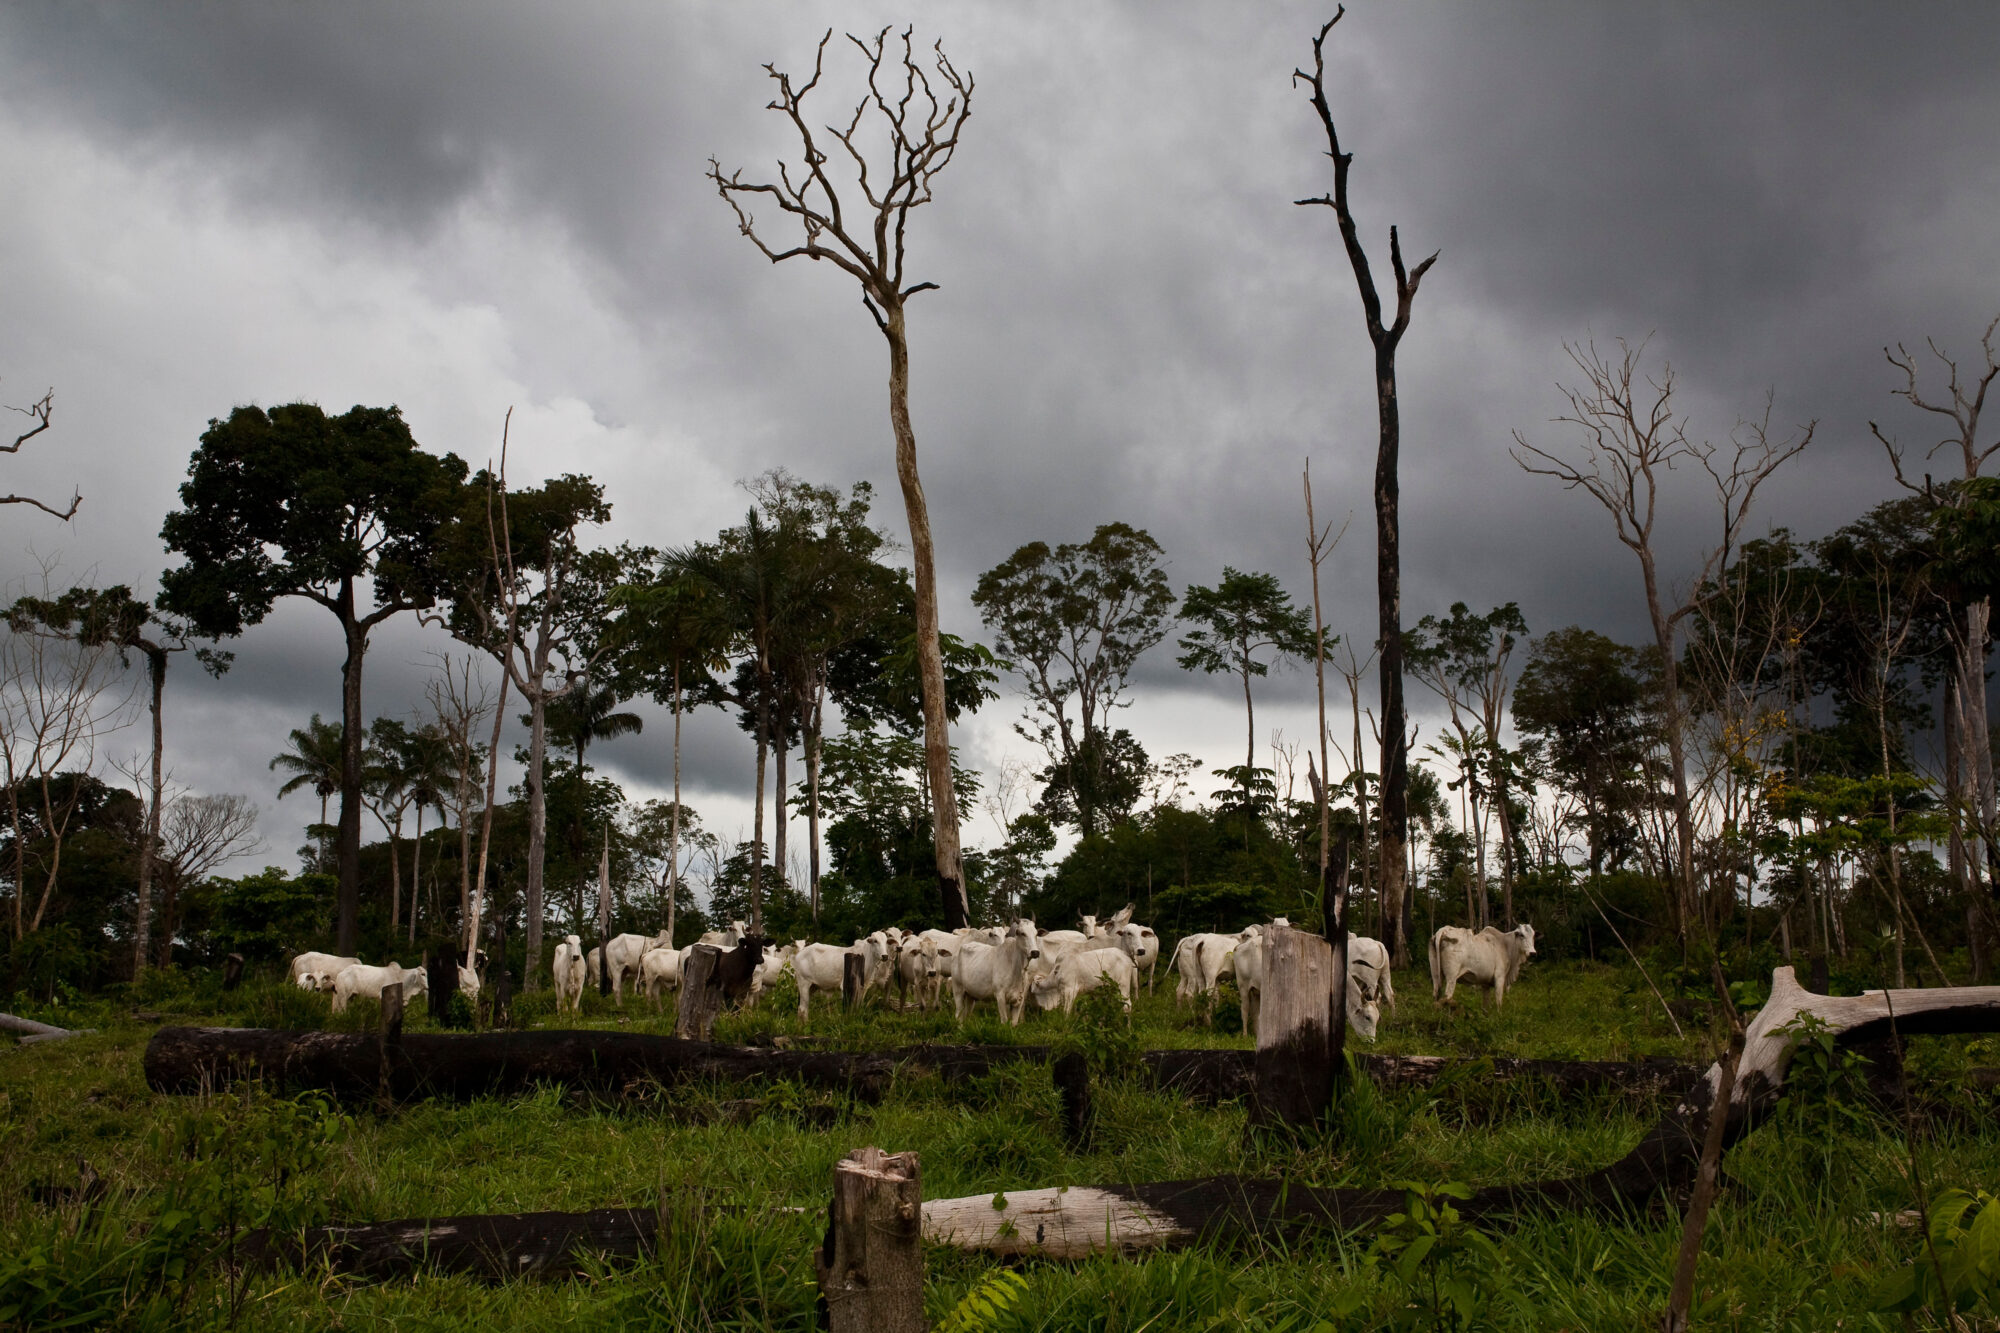 <p>Cattle ranching in an illegally deforested area in Jamanxim forest in the Brazilian Amazon (Image: Ricardo Funari / Alamy)</p>